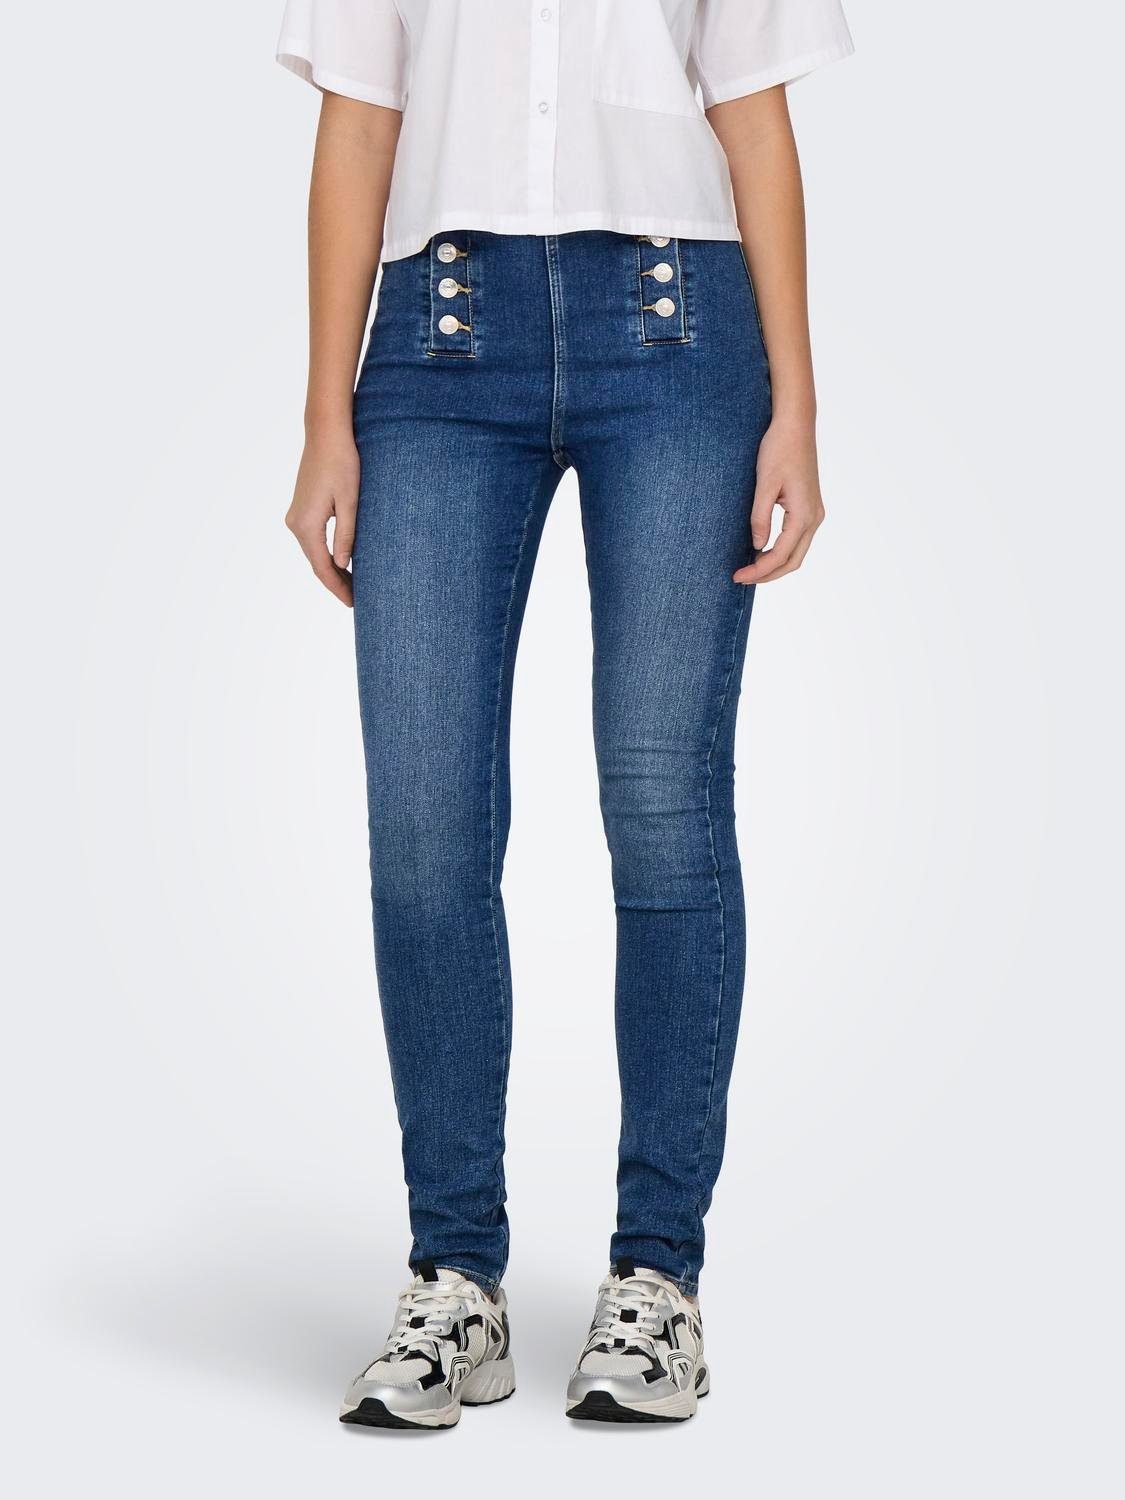 Only Skinny fit jeans ONLDAISY HW BUTTON SKINNY DNM